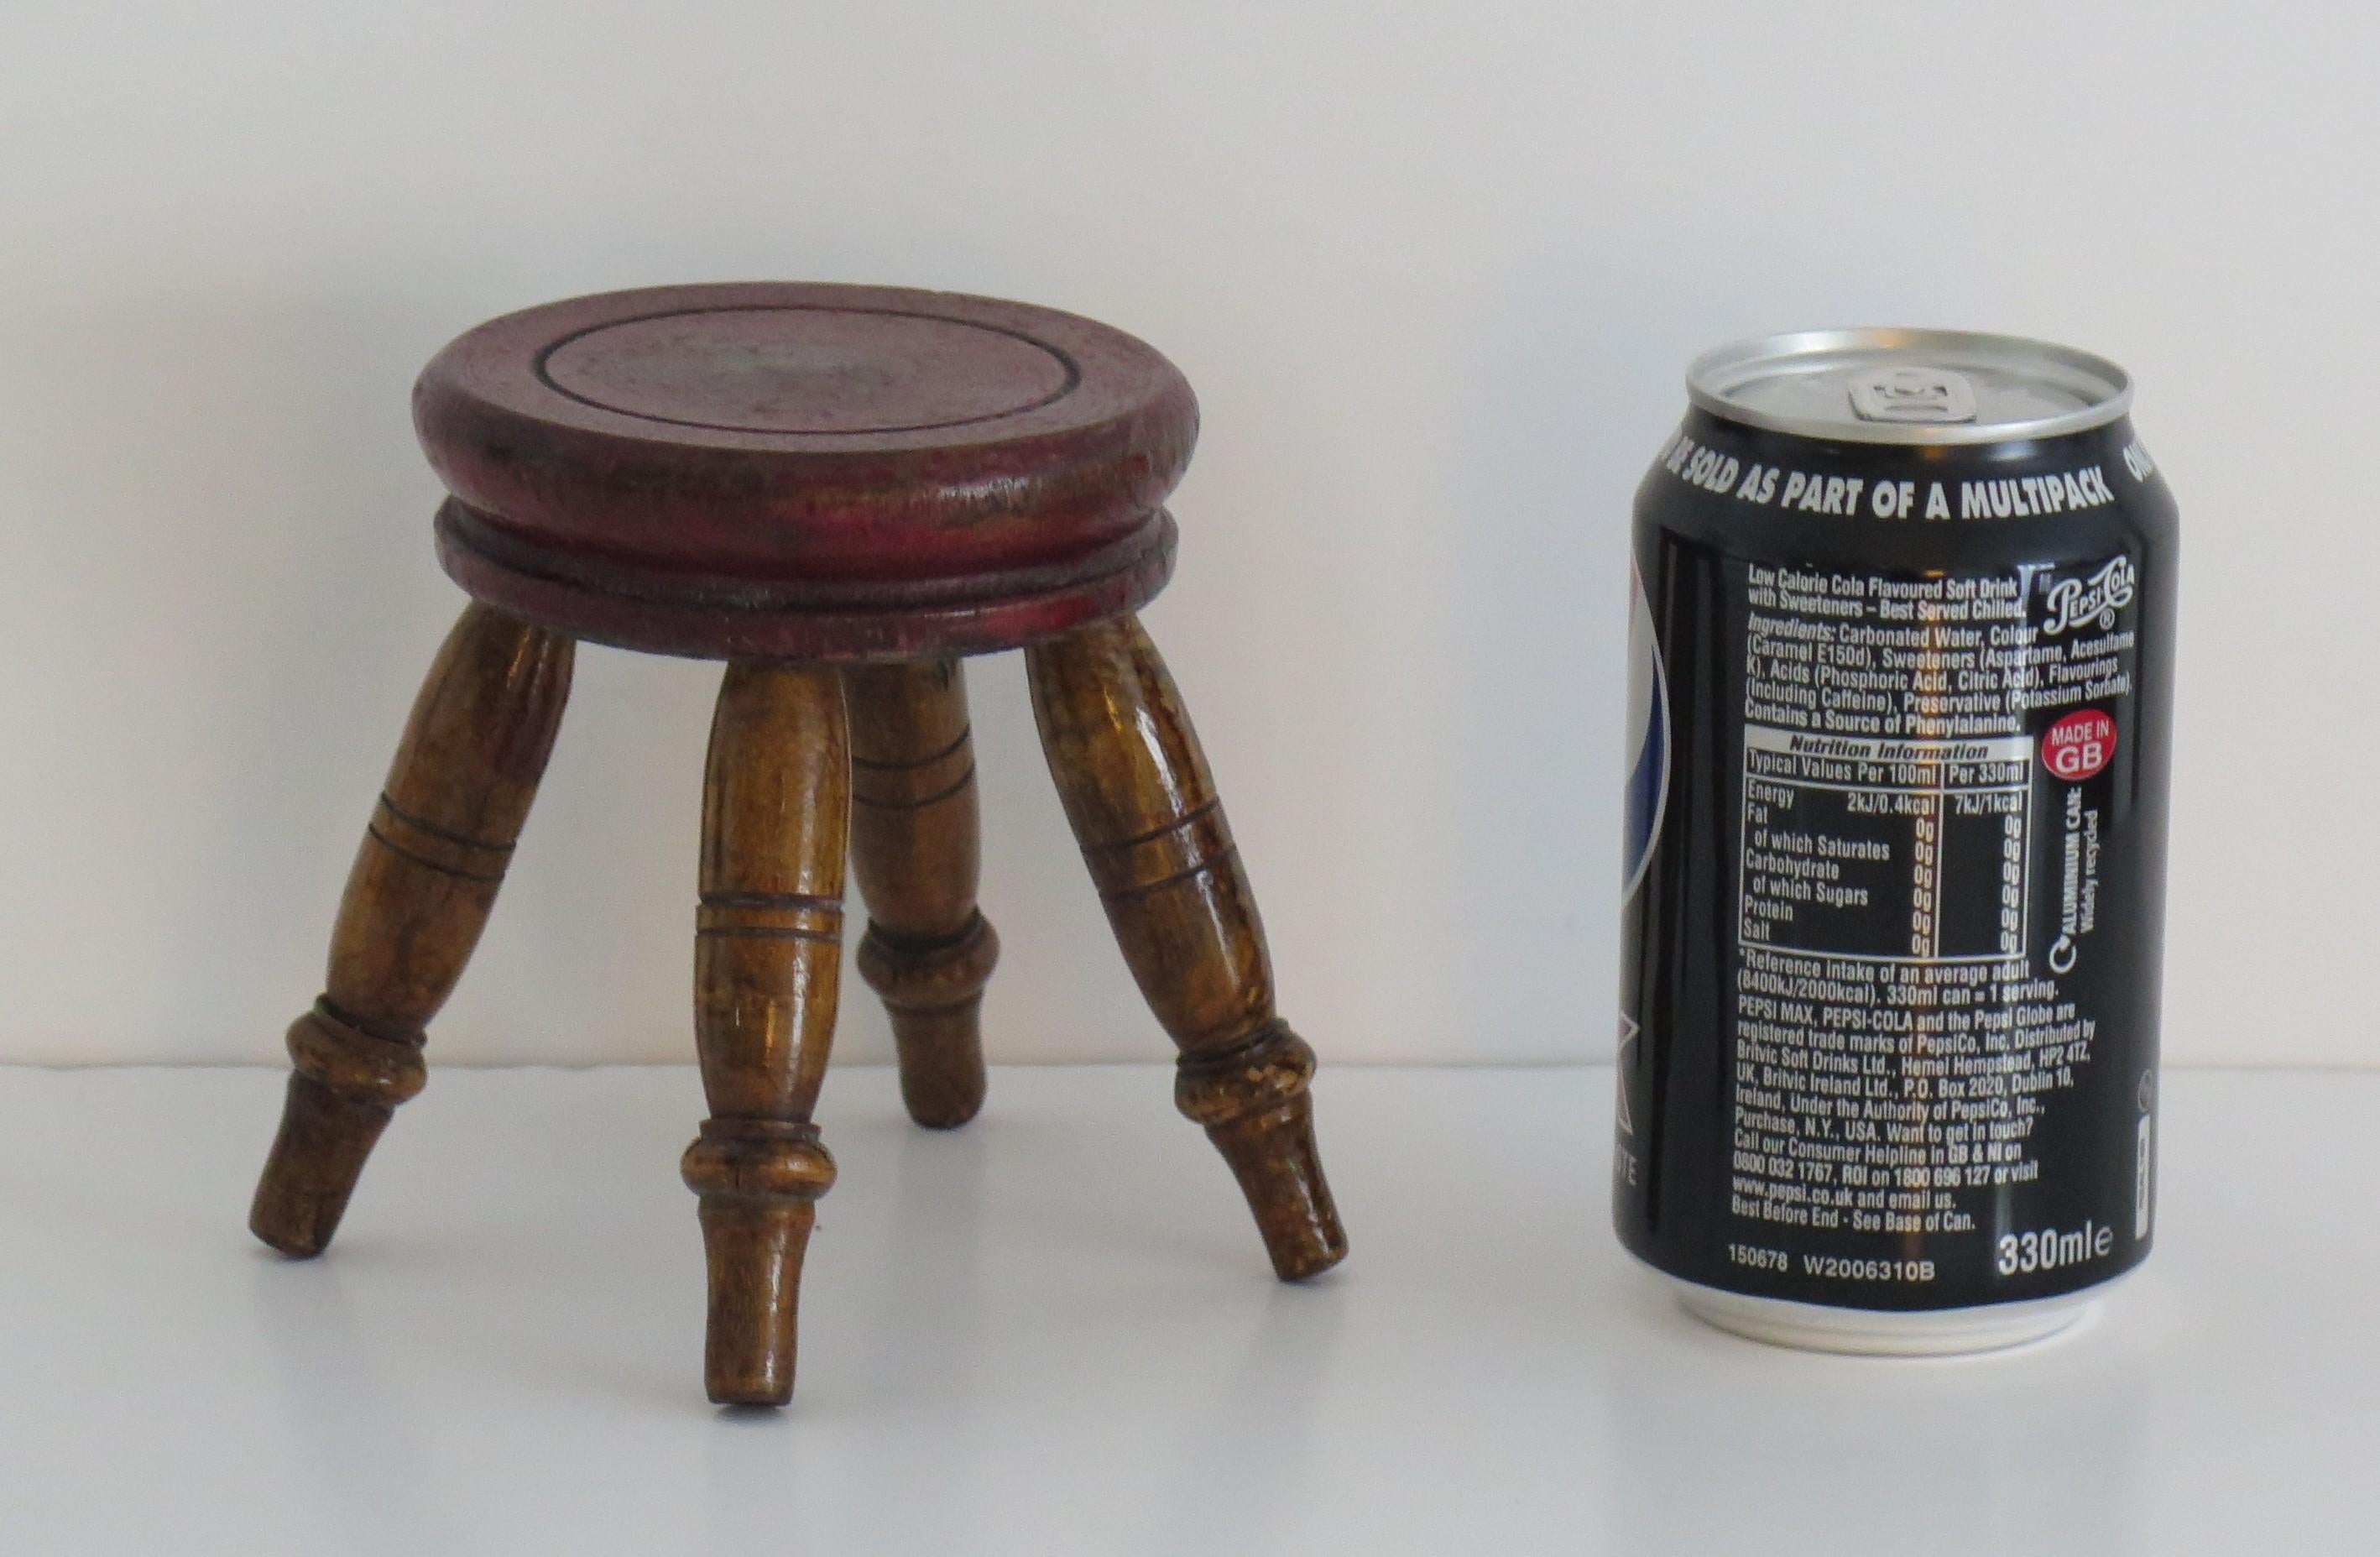 Rare small Candle Stand or Miniature Stool Hand Turned Wood, English circa 1850 For Sale 4